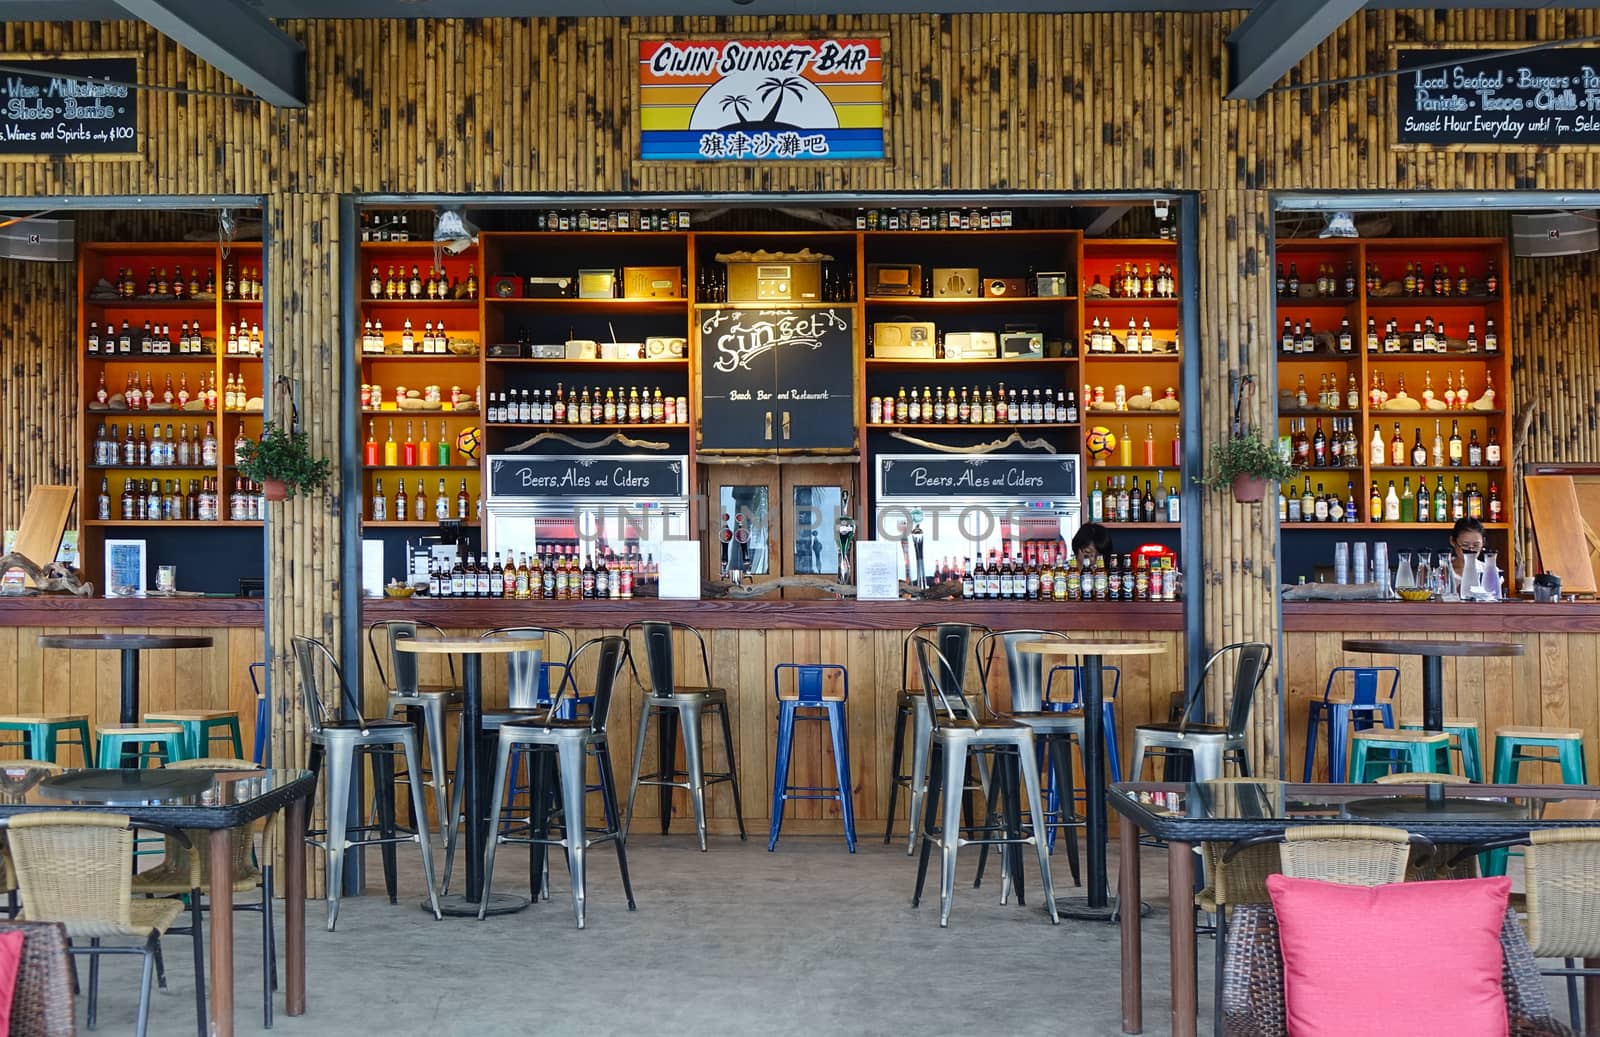 KAOHSIUNG, TAIWAN -- JULY 17, 2017: An outdoor beach side bar and cafe at the popular tourist destination of Cijin Island.